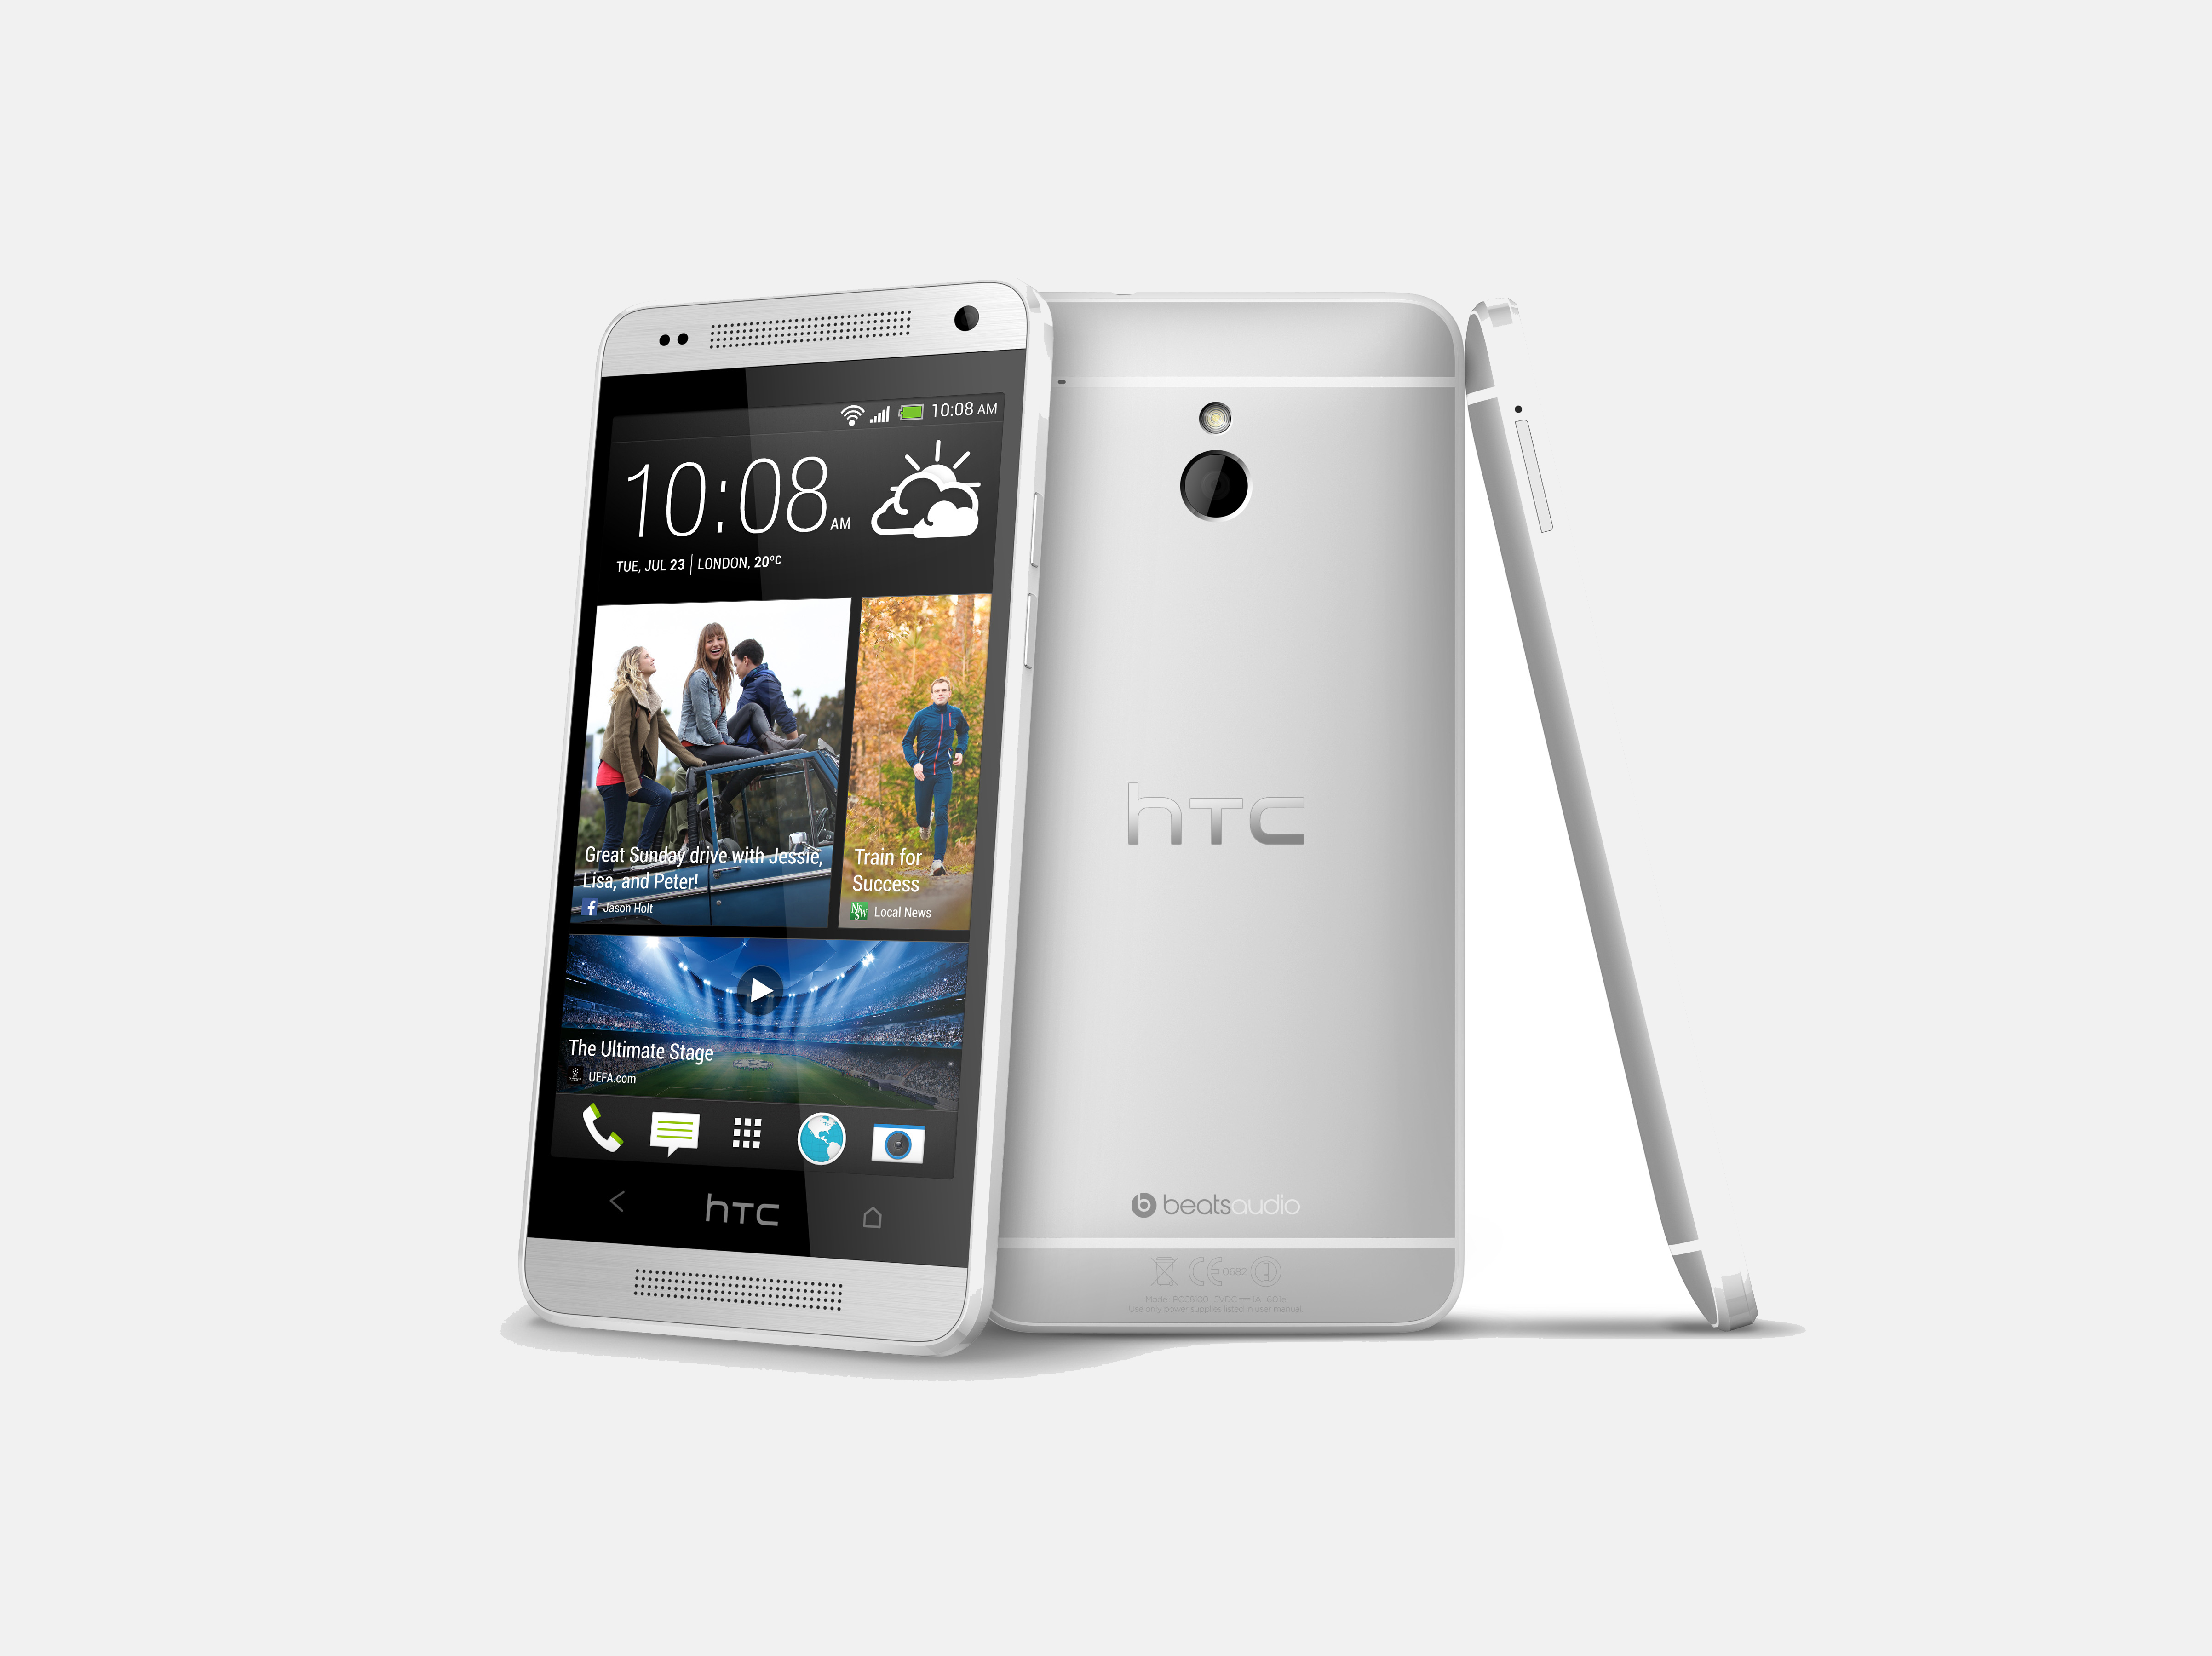 HTC One Mini: Good things may come in small package